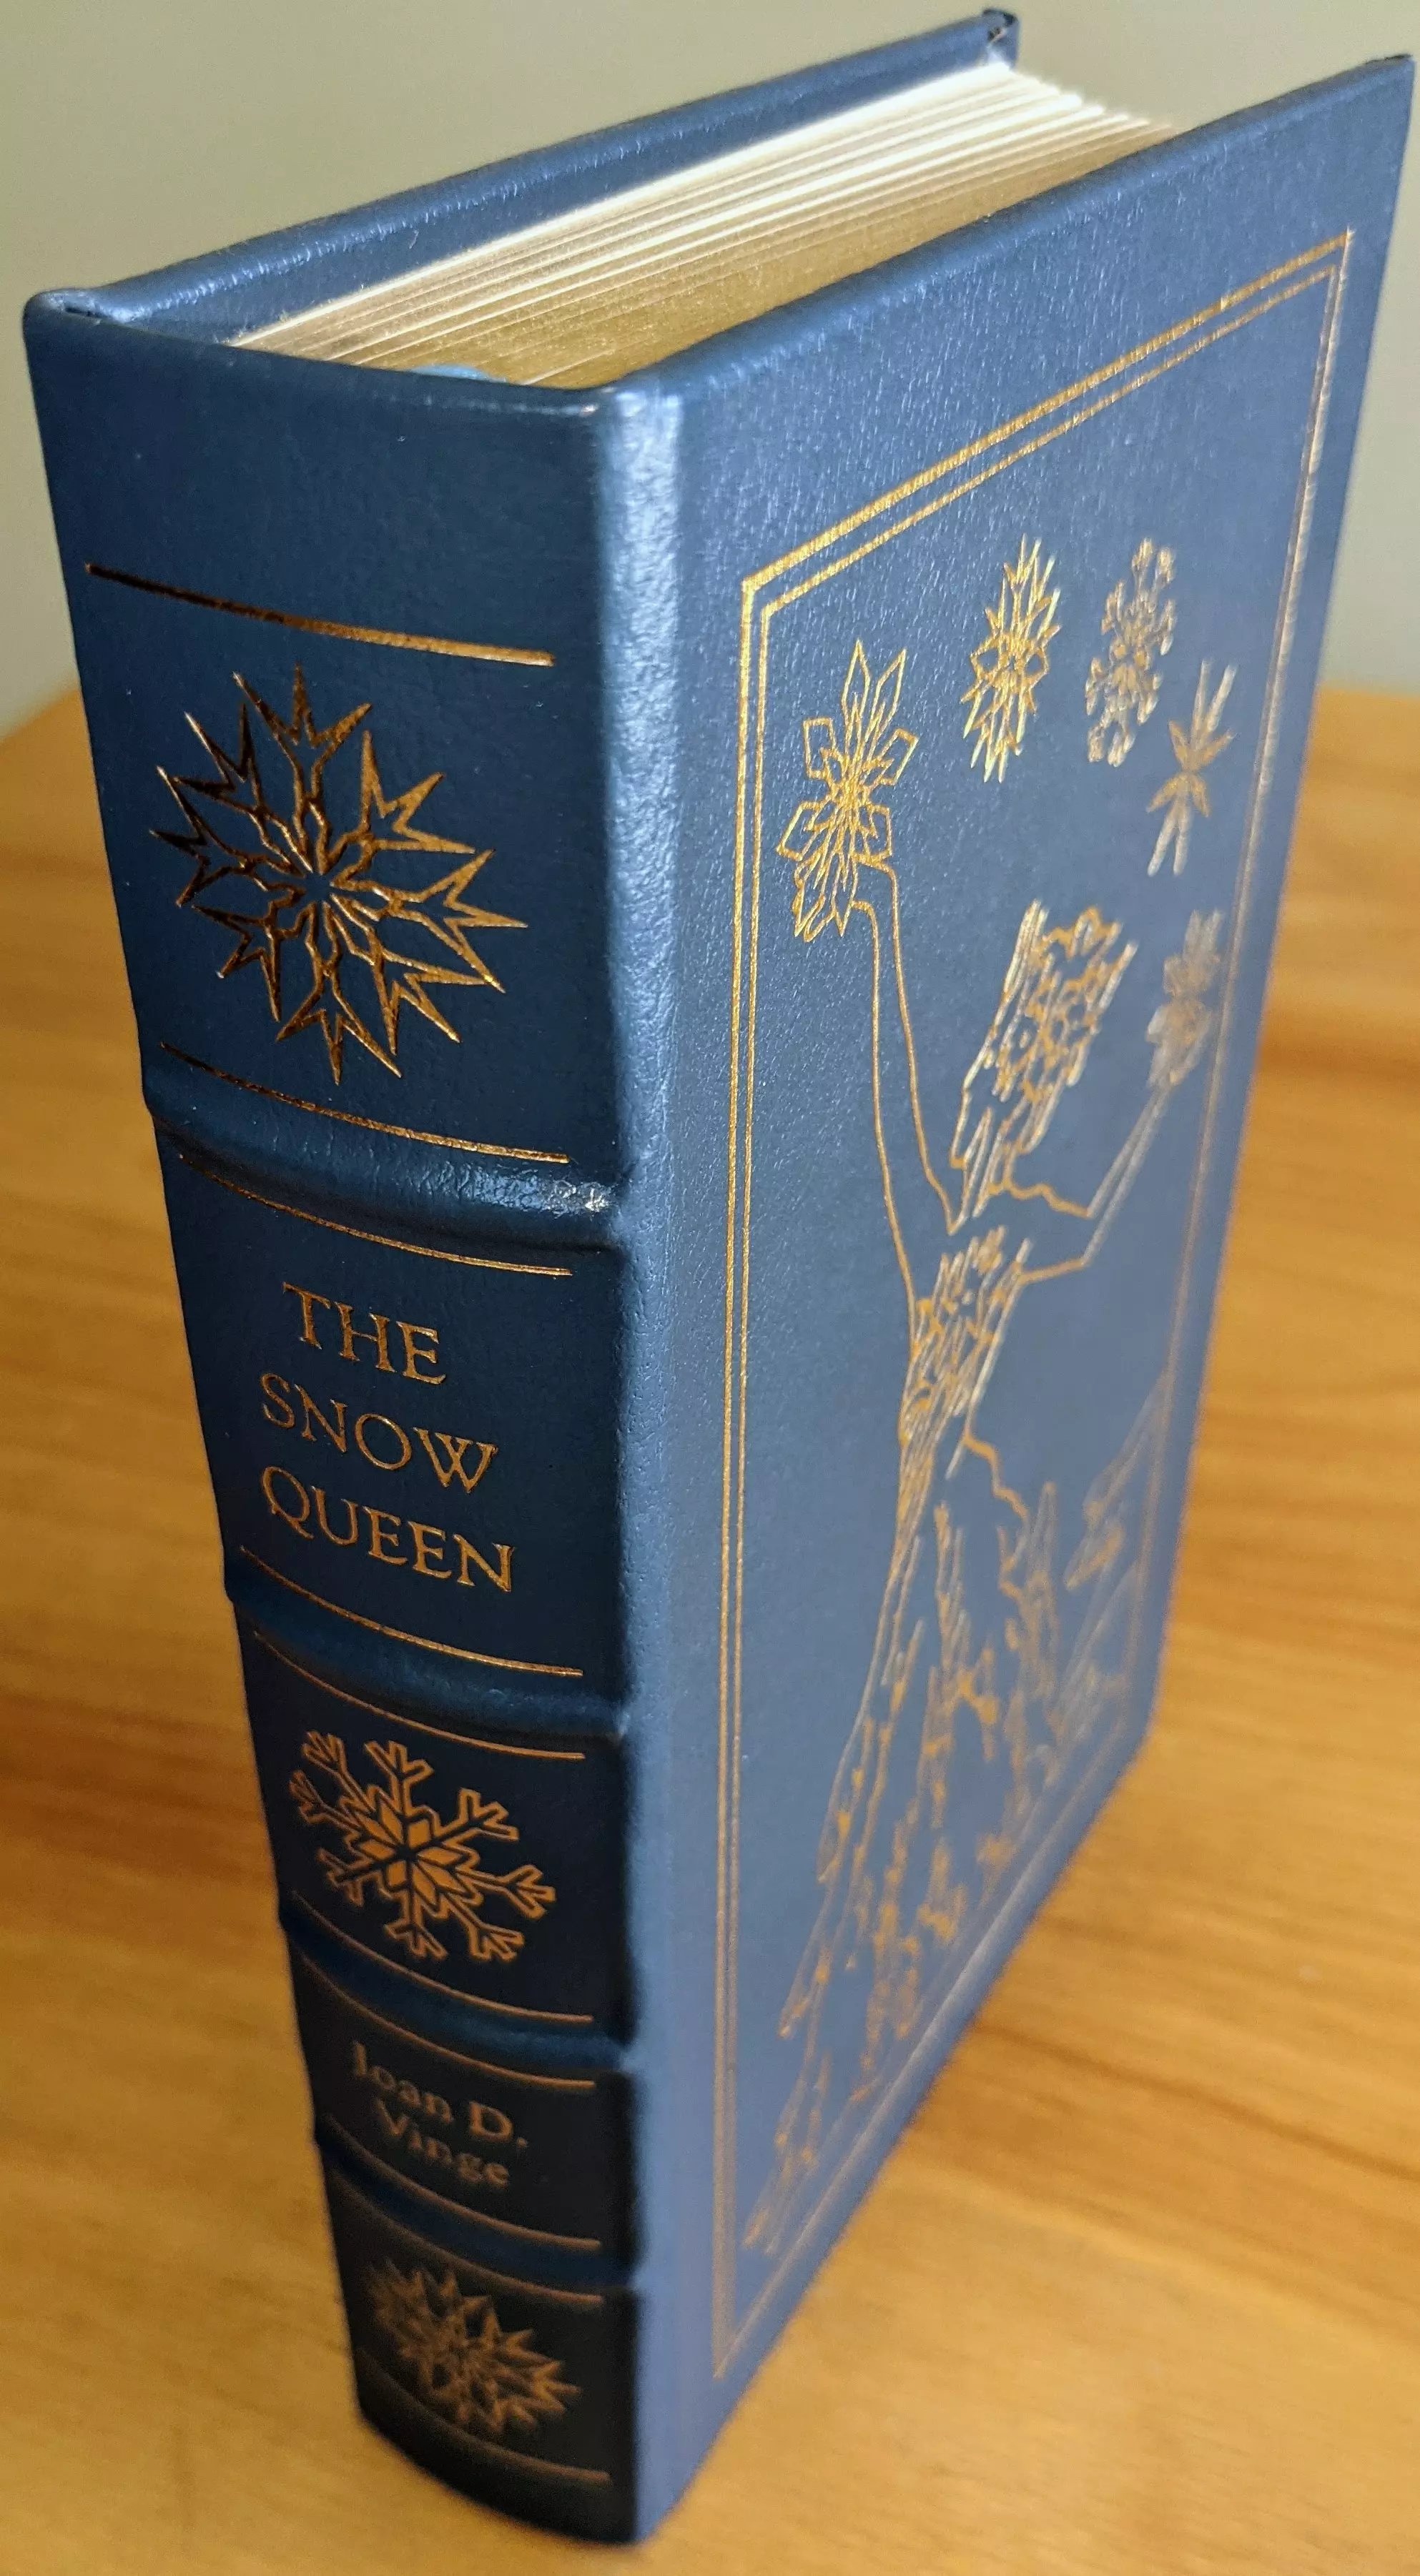 Stunning Blue Leather Bound hardback book with hubbed spine, cover artwork in 22kt gold, printed on archival paper with gold gilded edges, smyth sewing & concealed muslin joints
	  - original artwork by Pat Morrissey